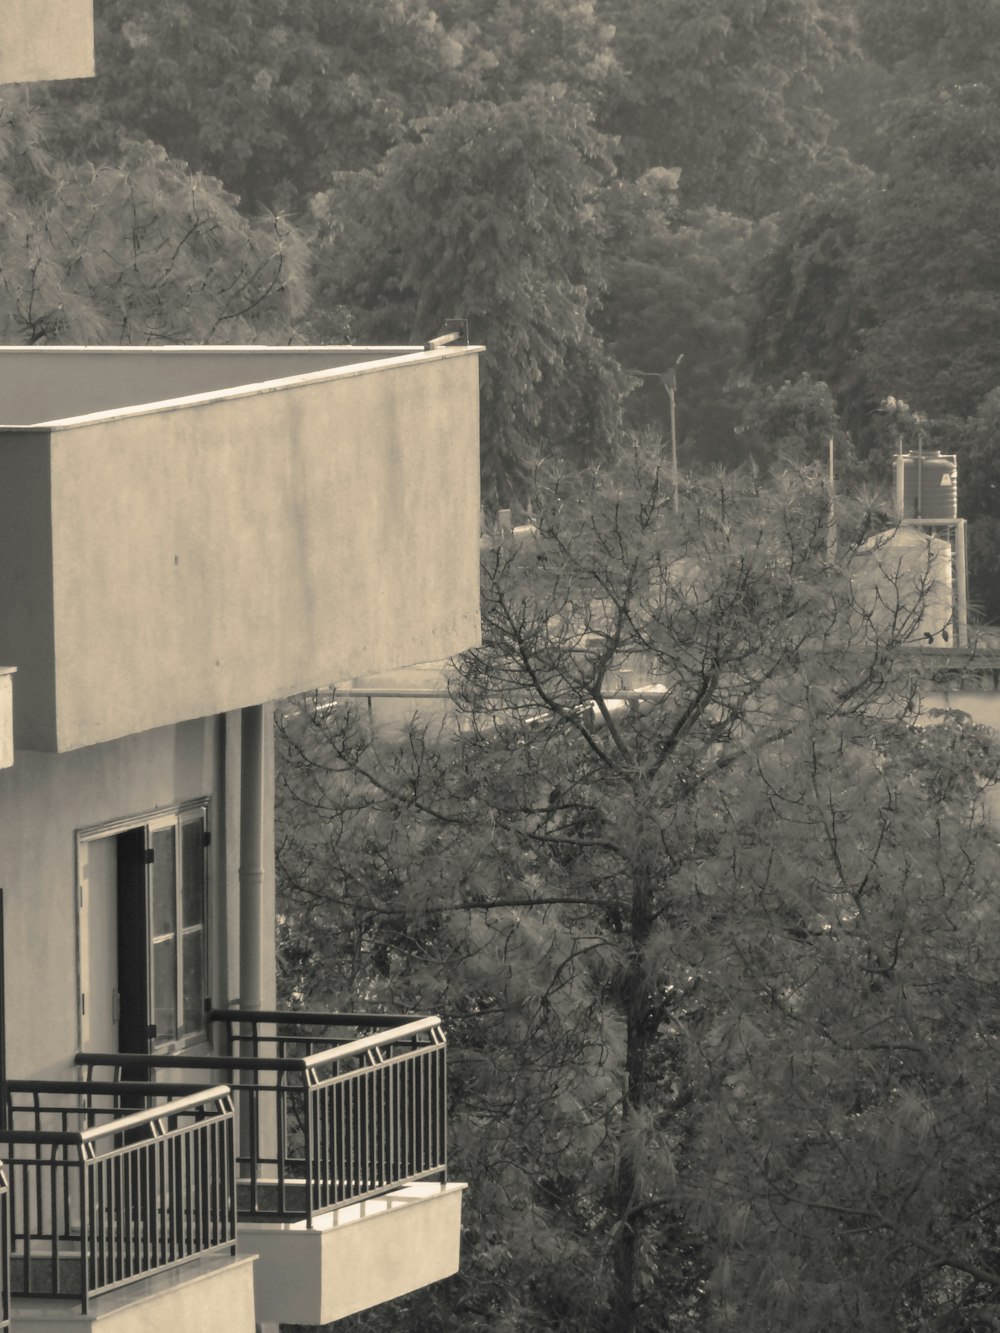 a black and white photo of a building and trees